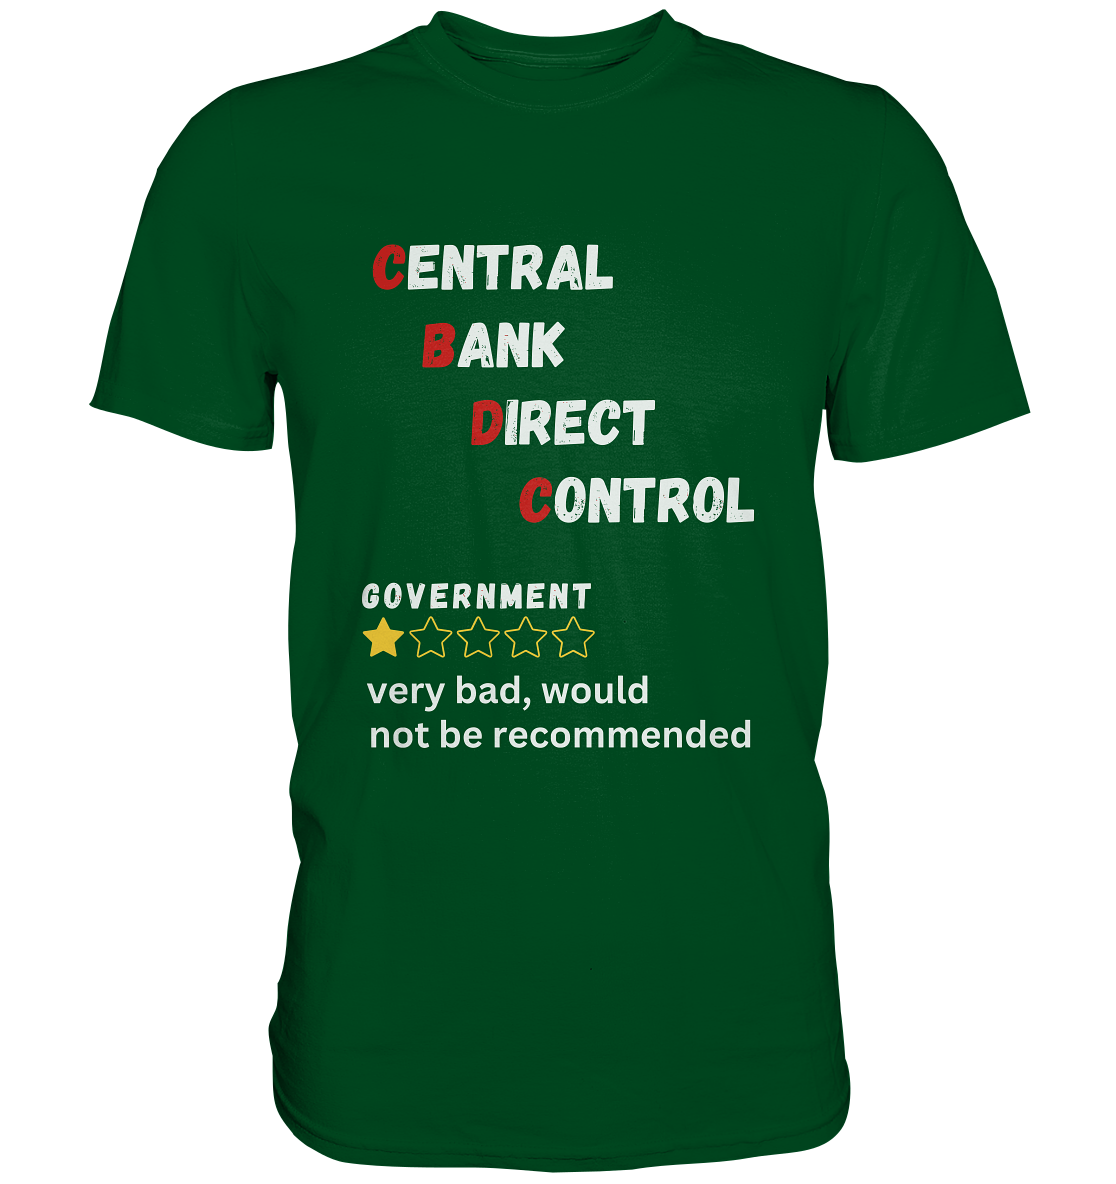 CENTRAL BANK DIRECT CONTROL - Government... not be recommended (Ladies Collection 21% Rabatt bis zum Halving 2024)  - Premium Shirt